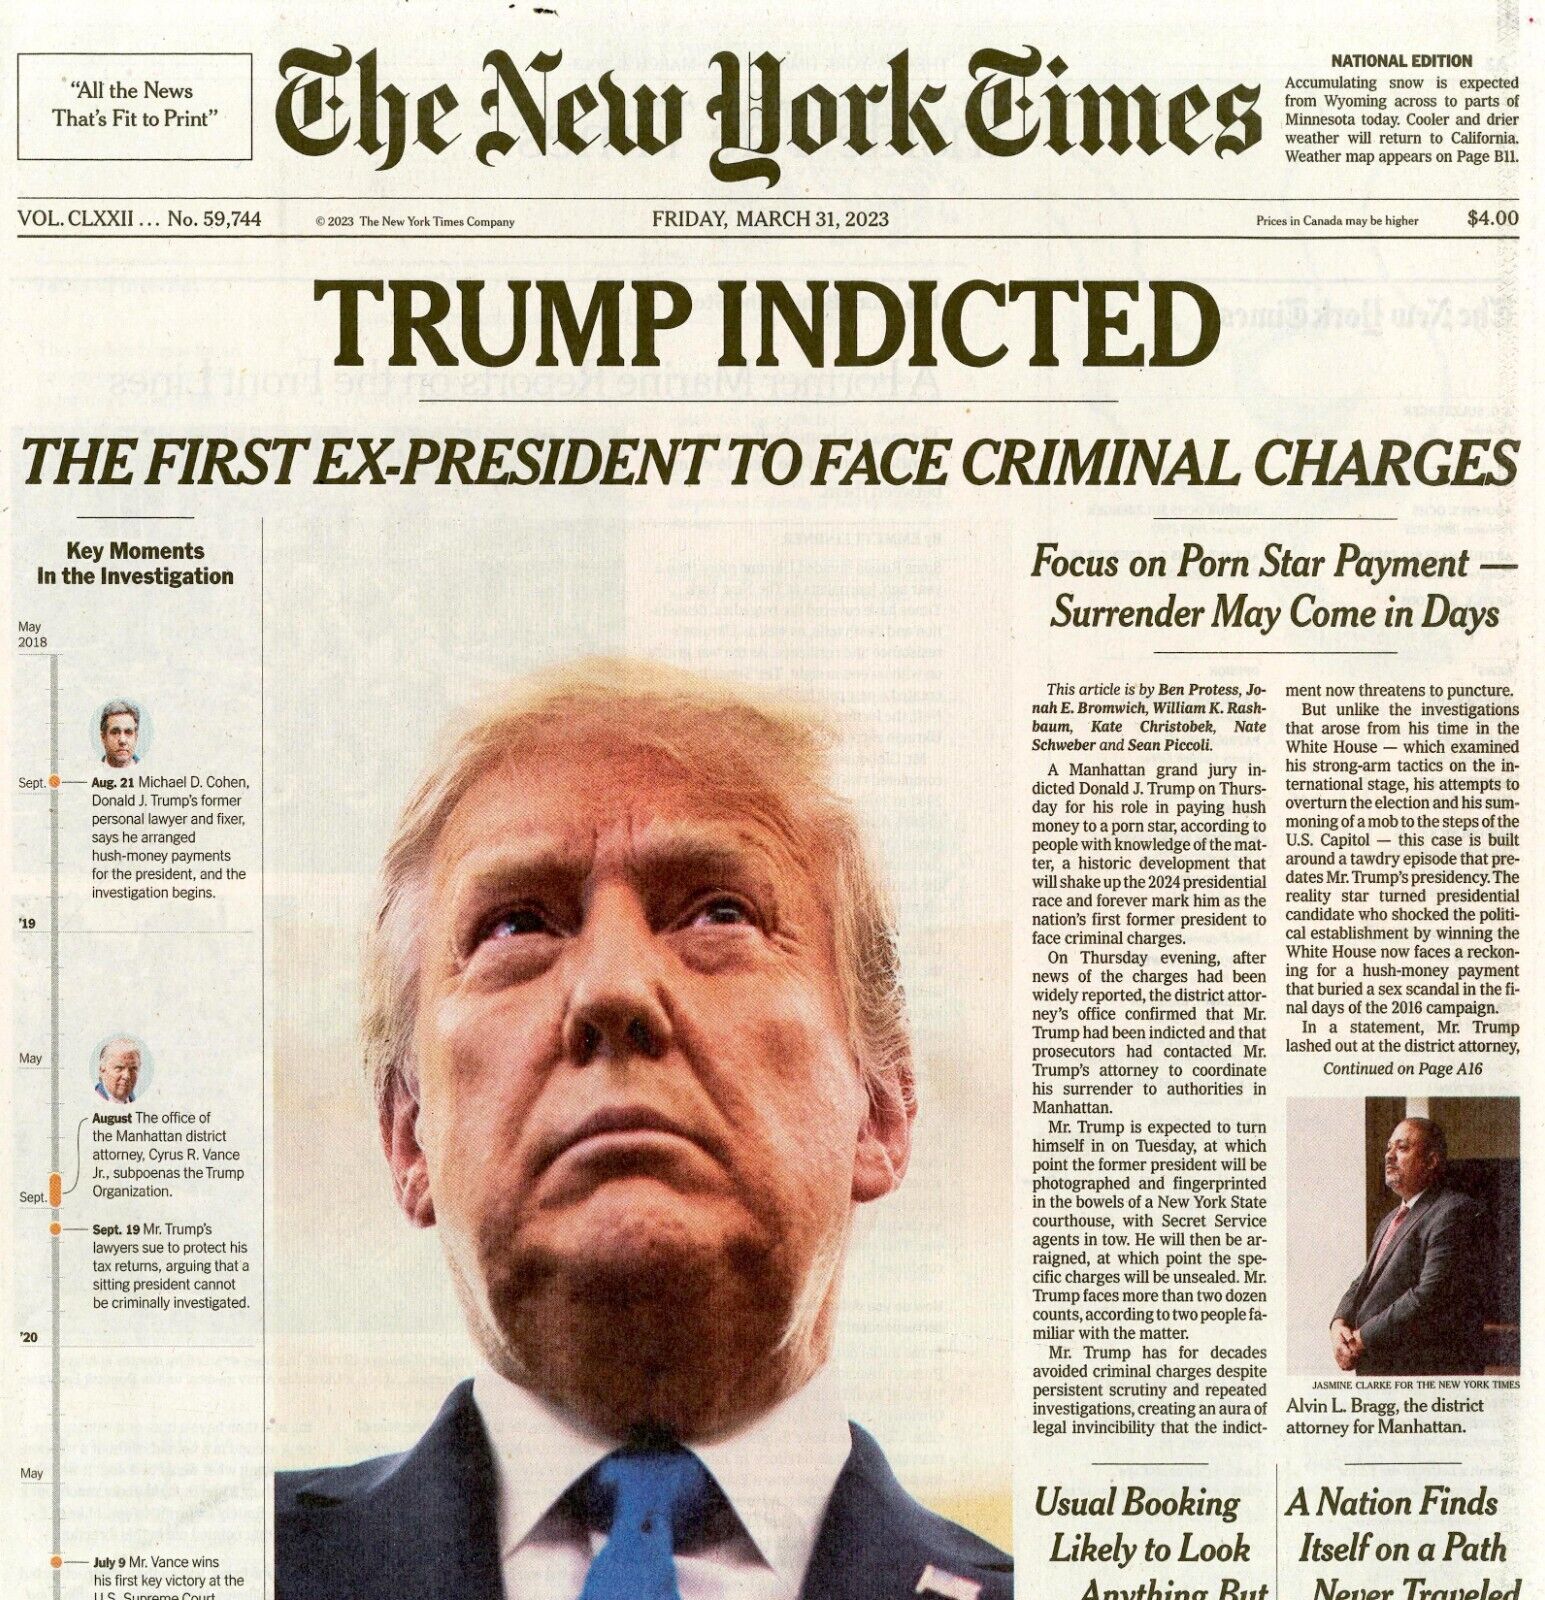 THE NEW YORK TIMES NEWSPAPER - MARCH 31, 2022 - TRUMP INDICTED - BRAND NEW